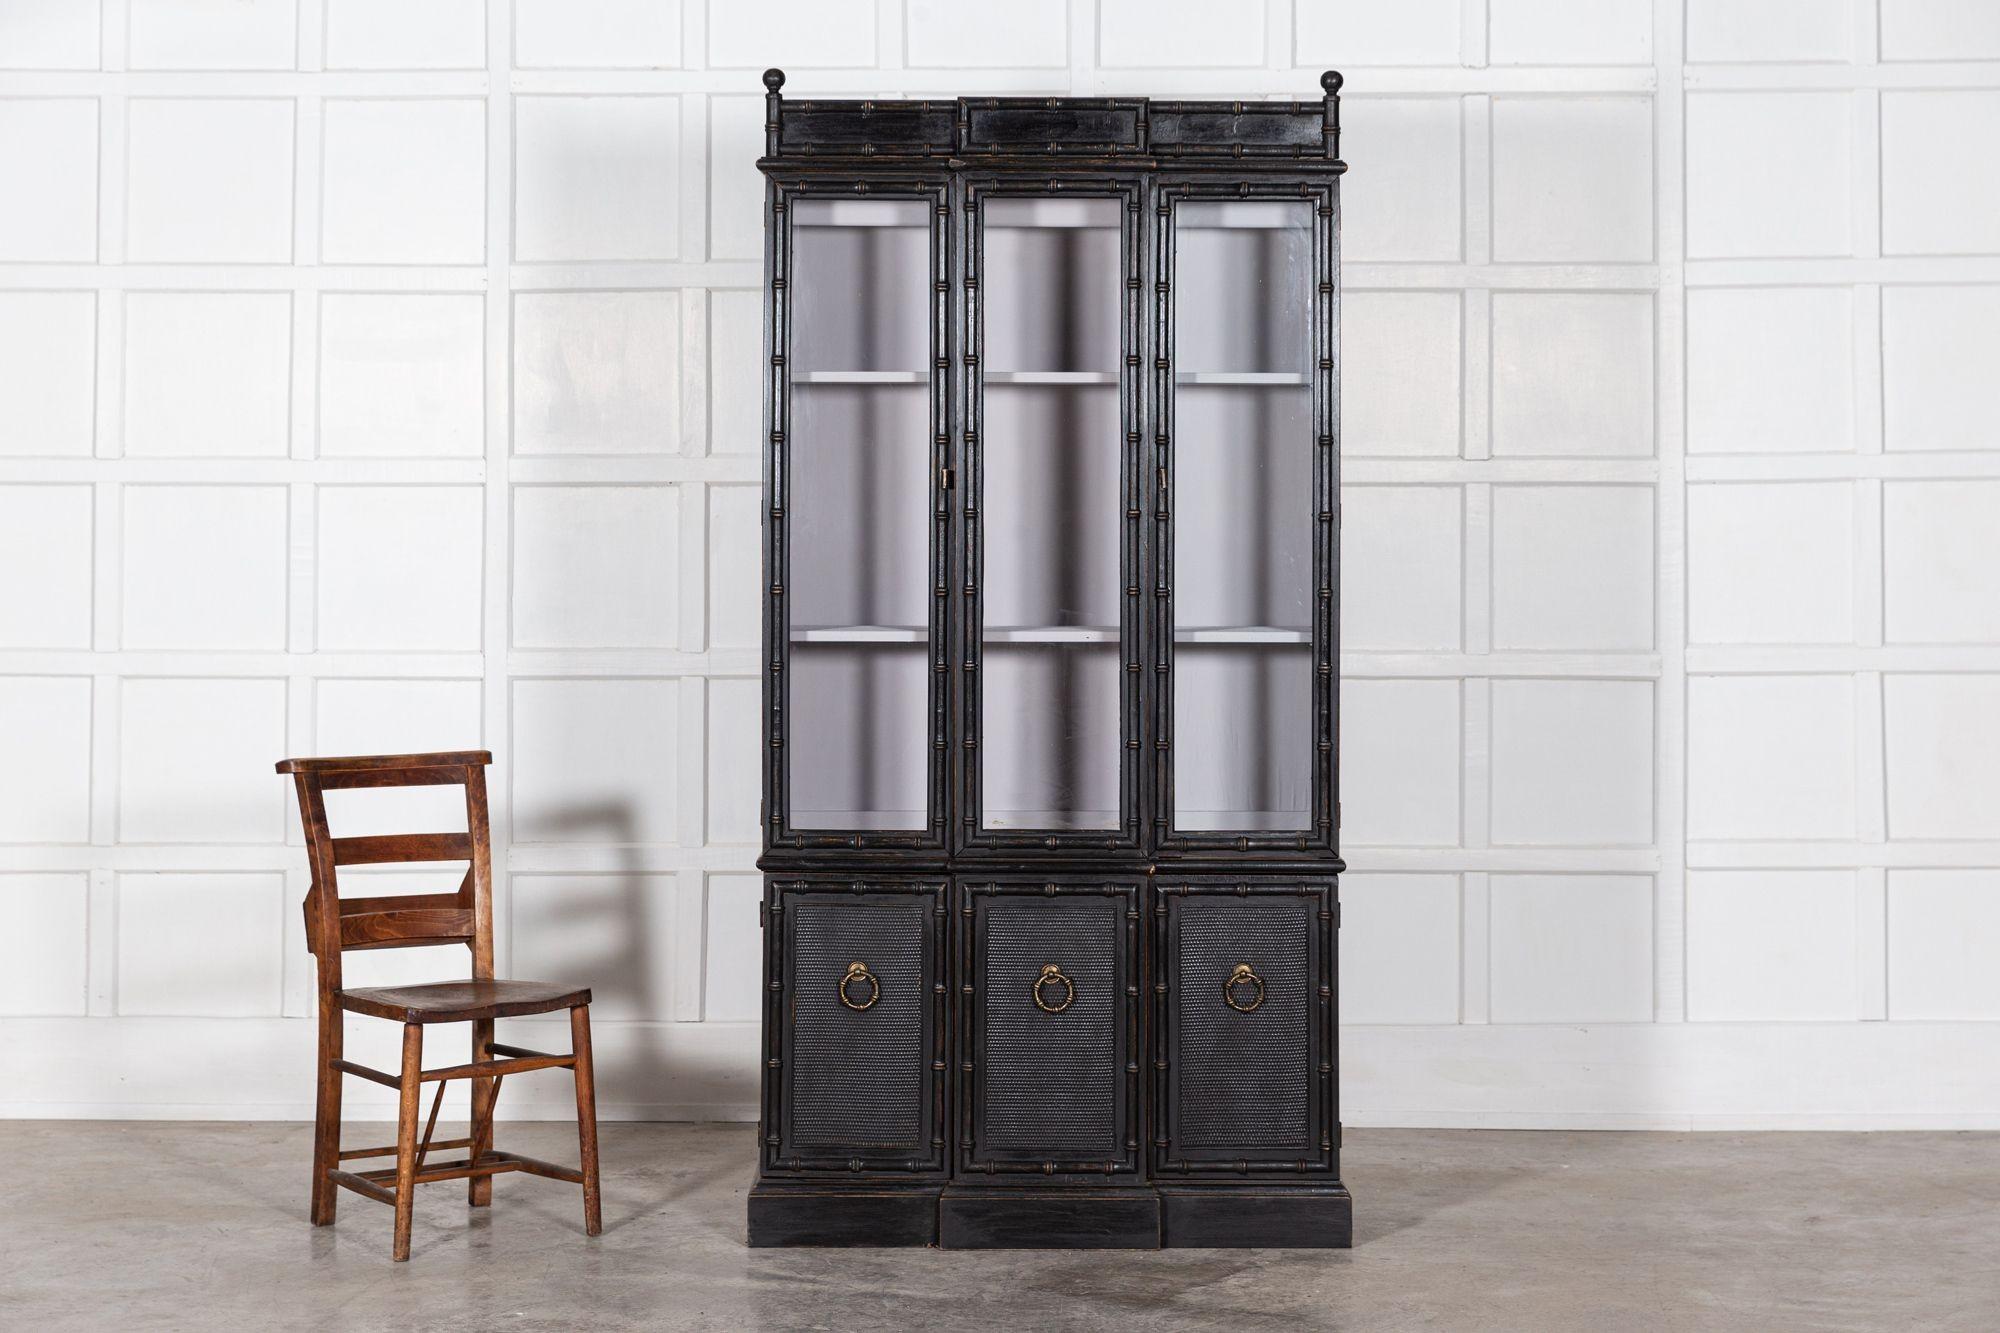 20th Century French Ebonised Faux Bamboo Beech Glazed Breakfront Bookcase / Vitrine For Sale